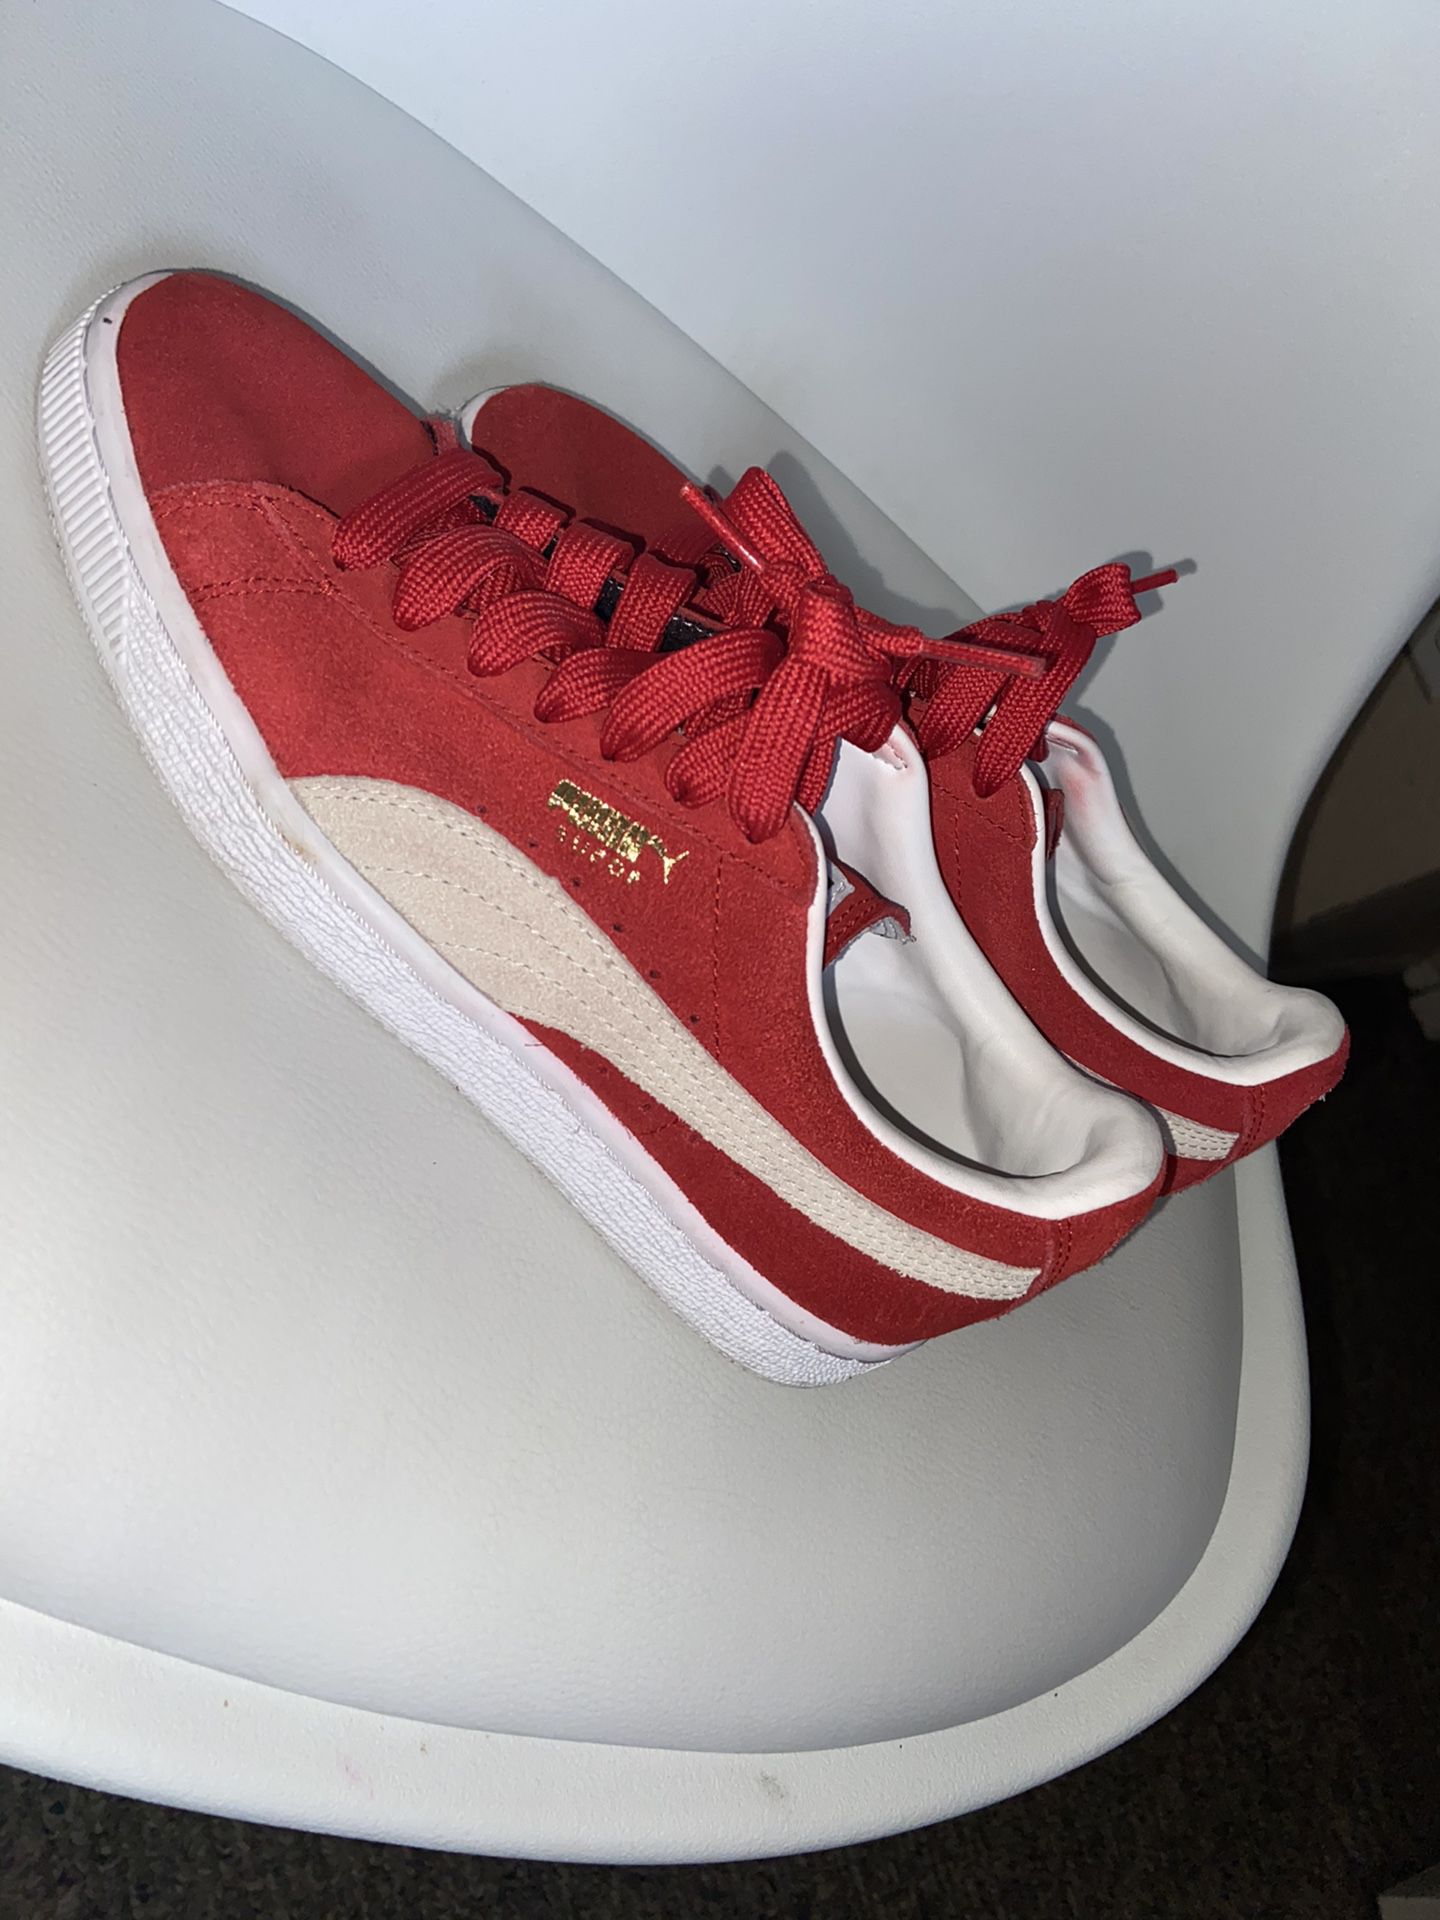 Red pumas size 5